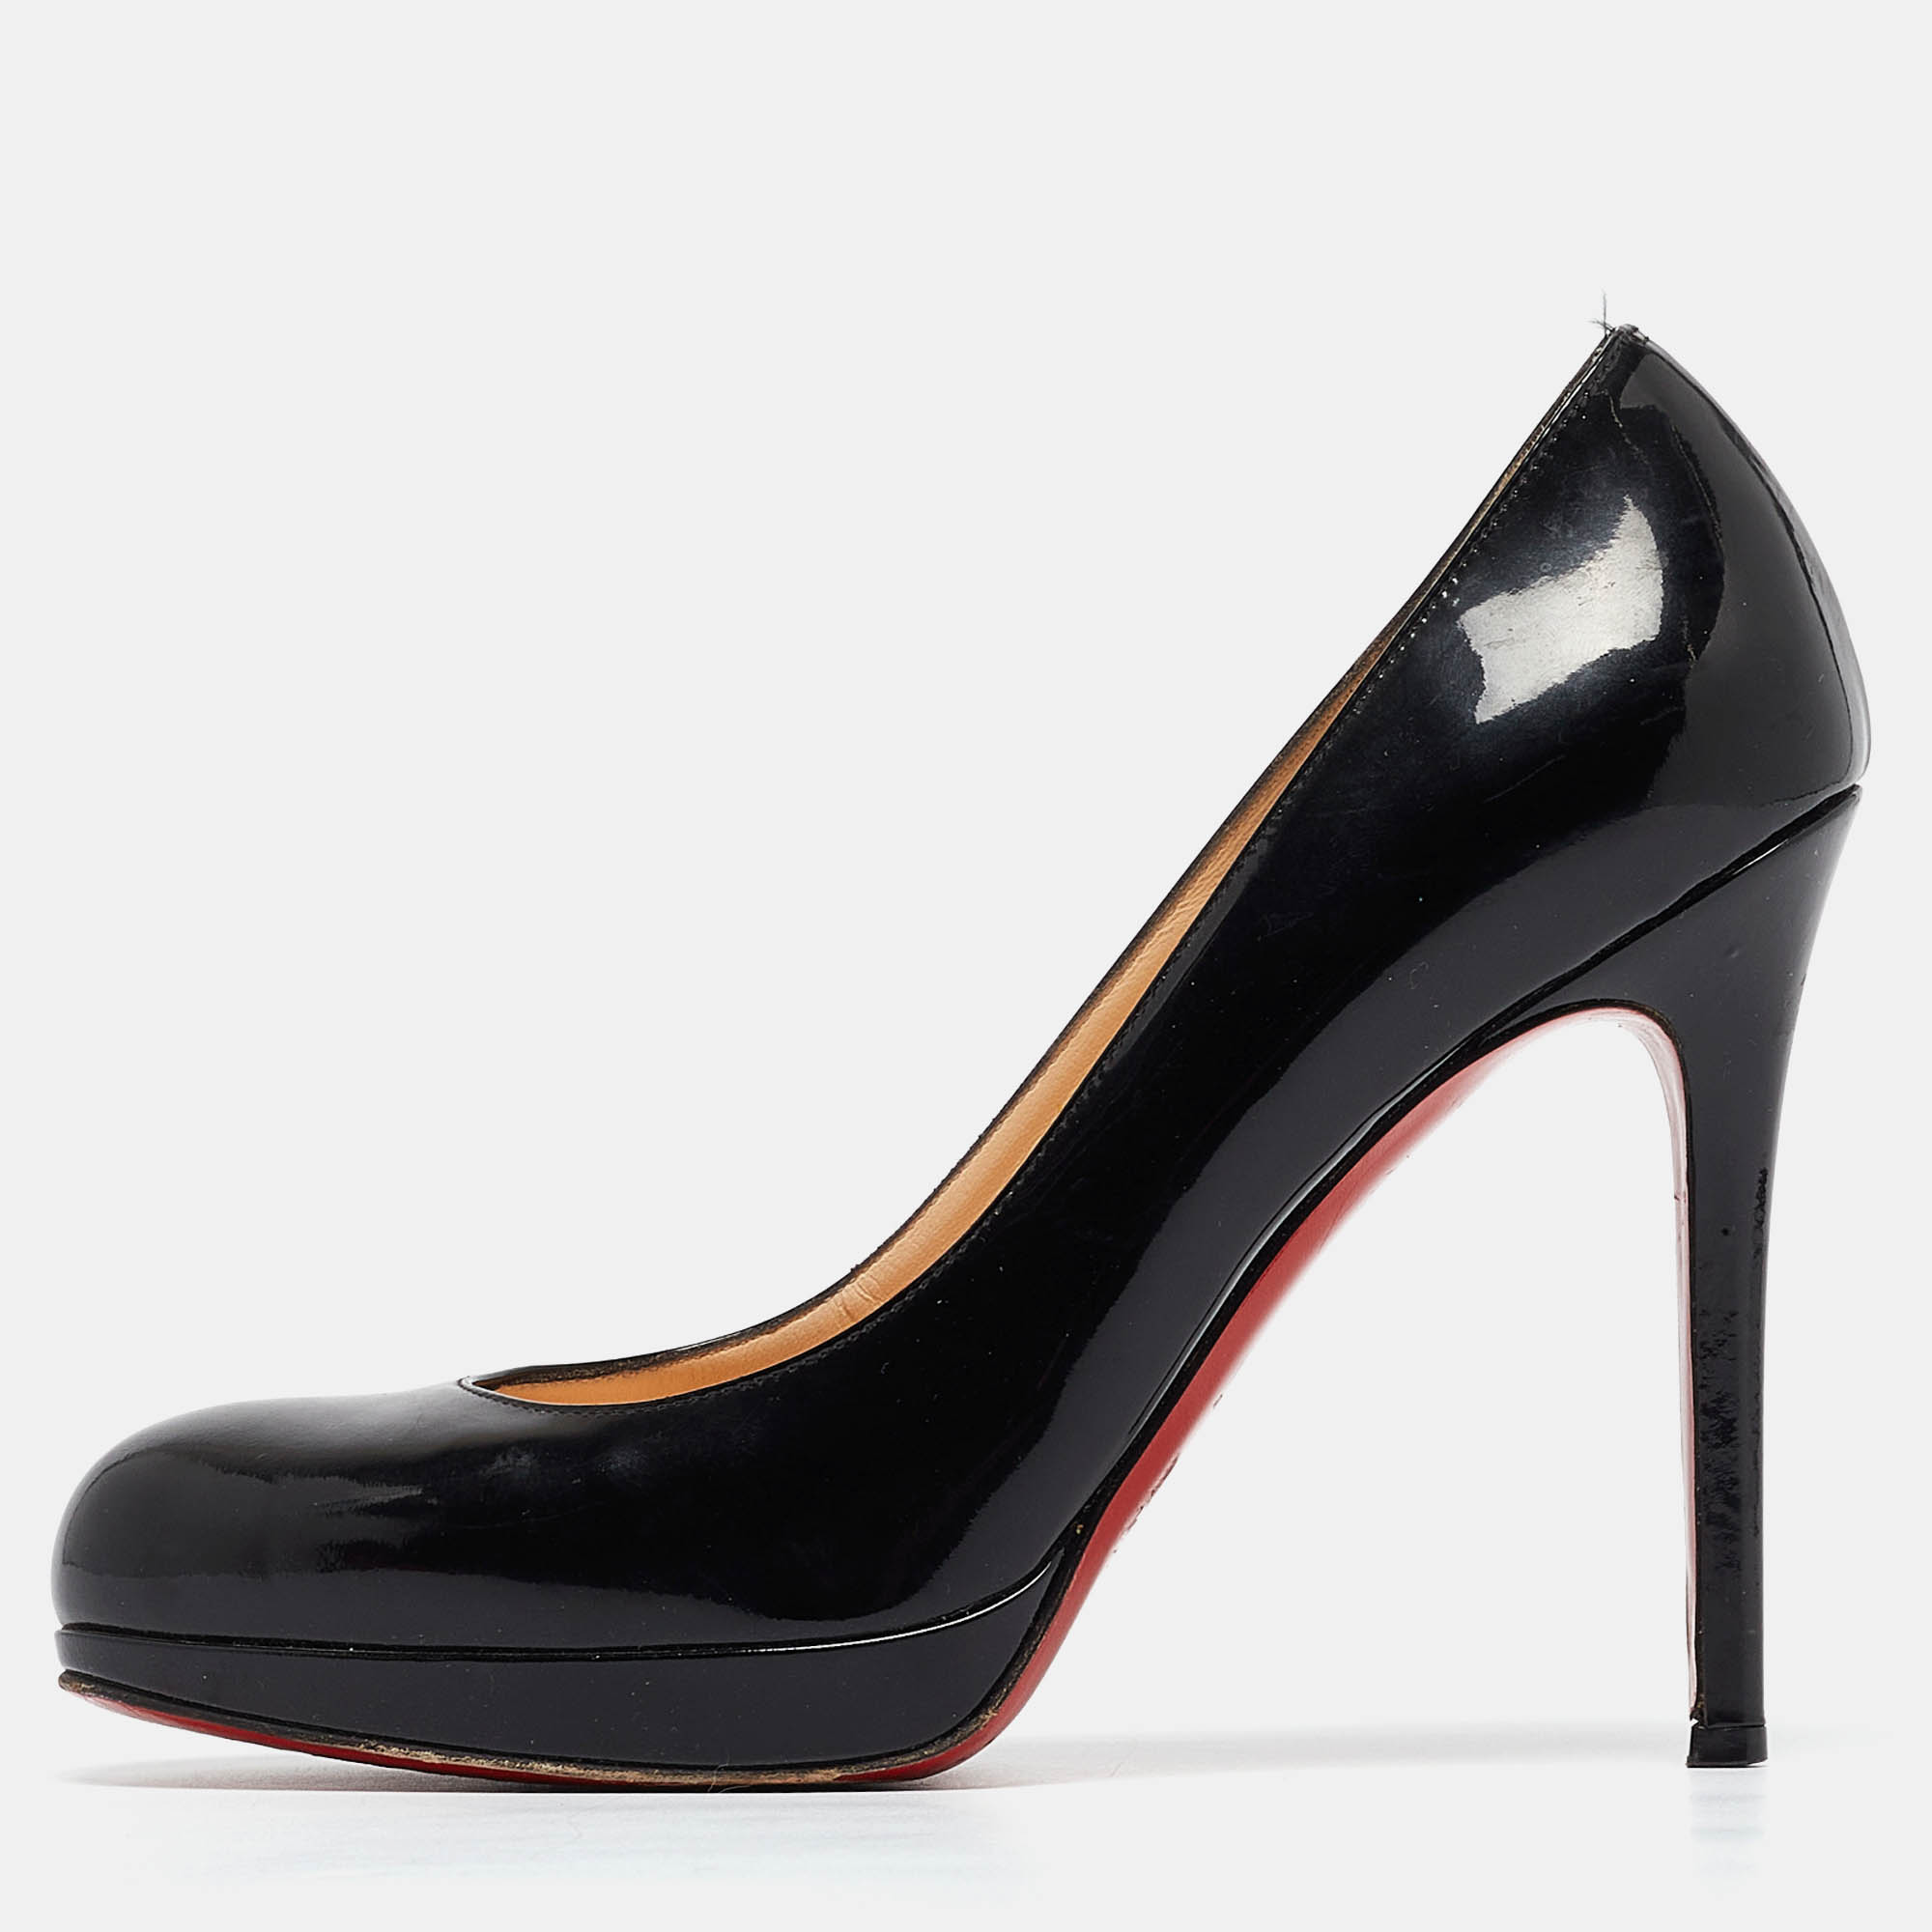 Christian louboutin black patent leather new simple pumps size 37